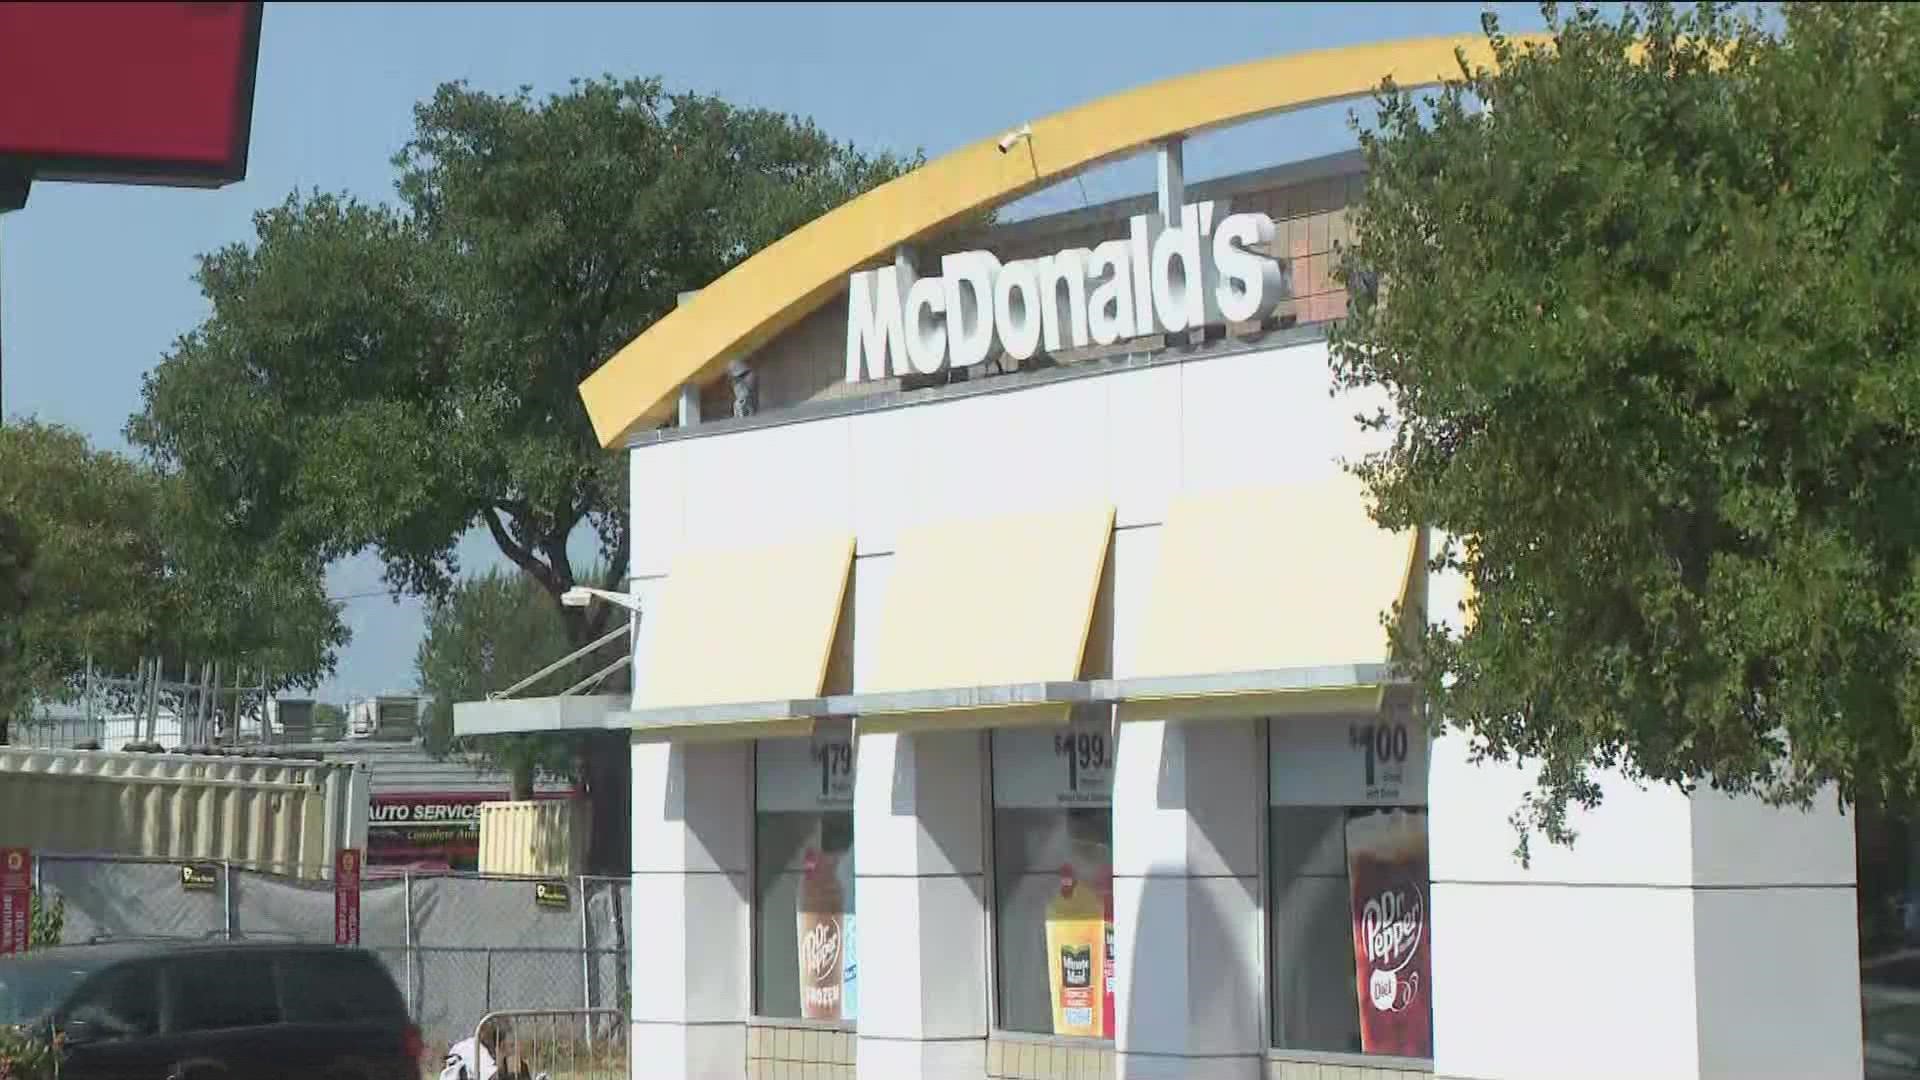 Police said a man hurt a McDonalds employee in North Austin before barricading himself inside the restaurant.